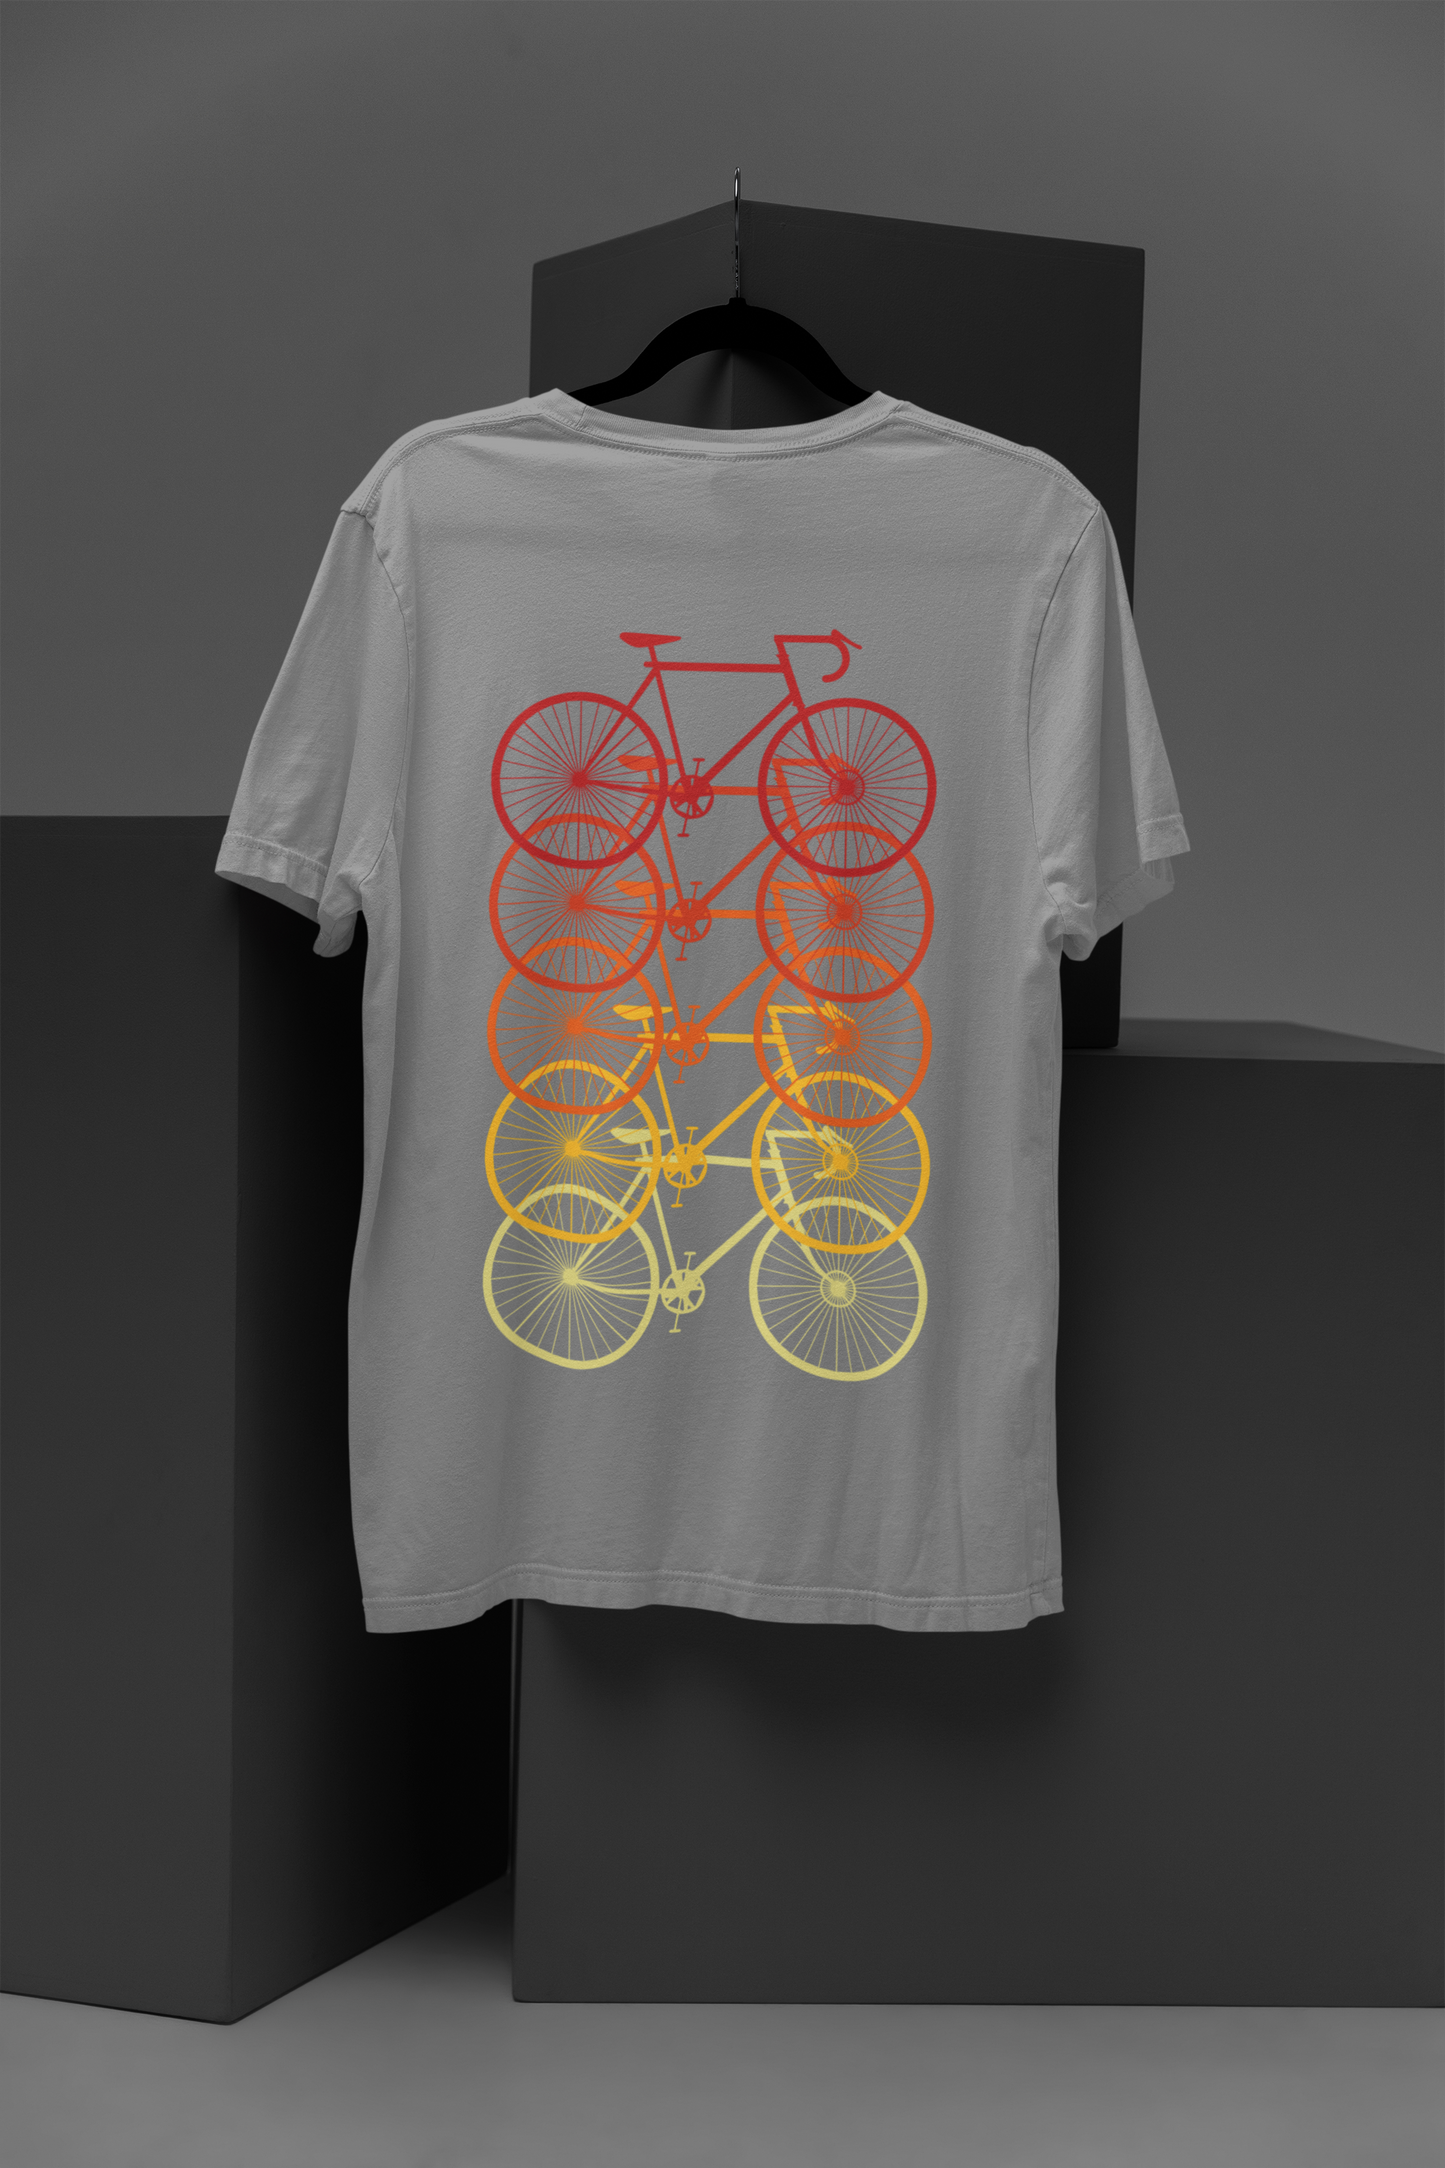 Ombre Cycling Graphic - Red to Yellow Gradient T-Shirt